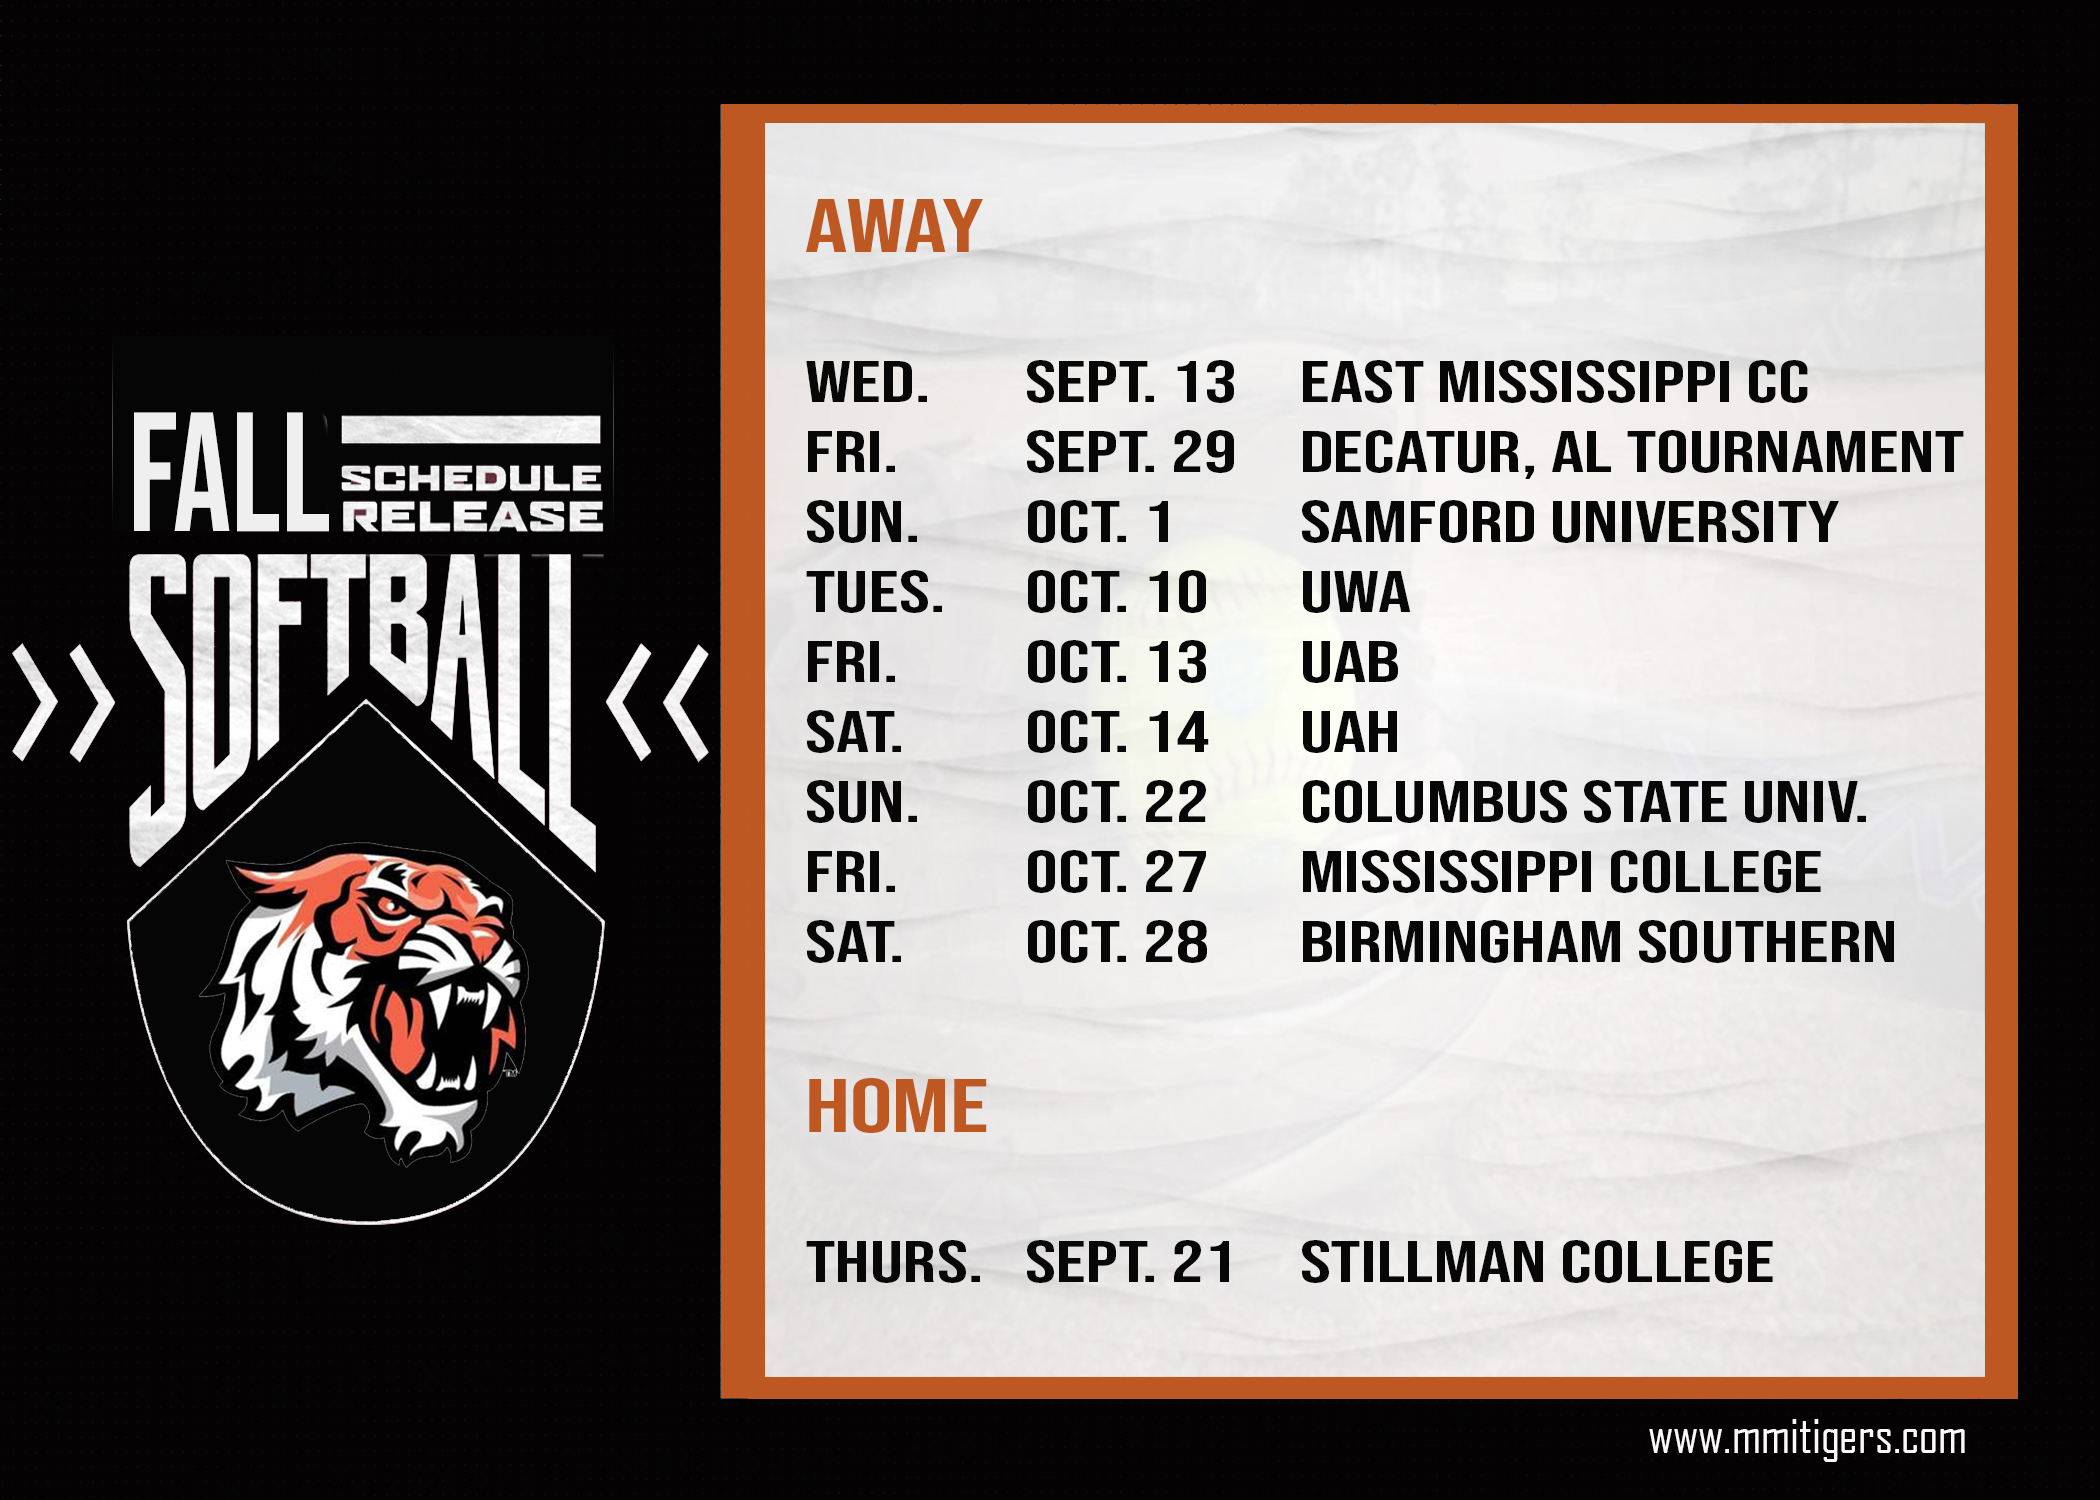 Lady Tigers Release Fall Schedule